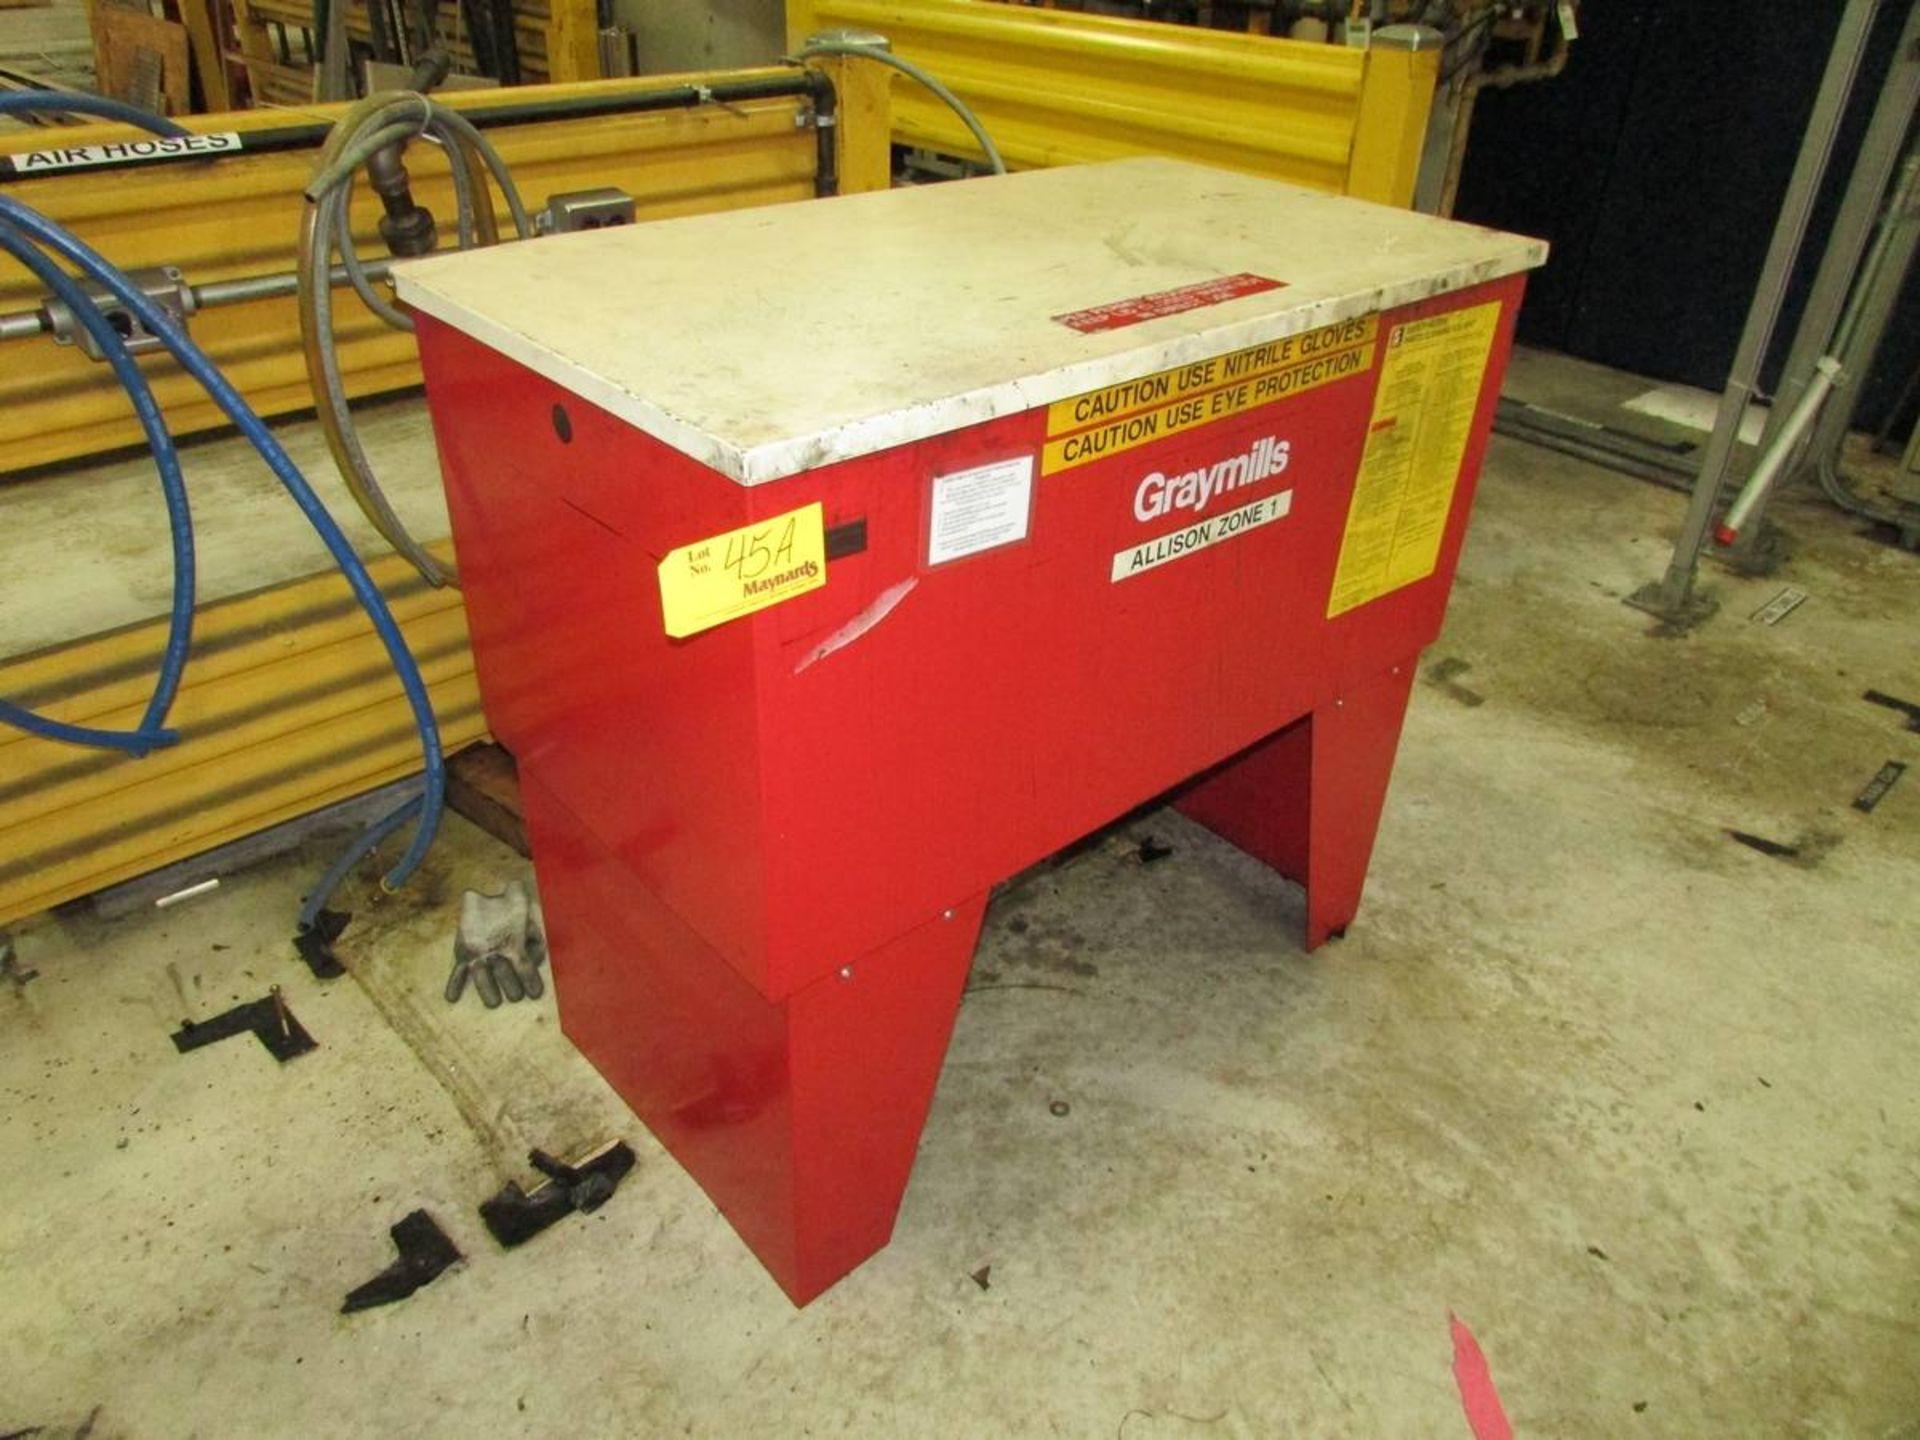 Graymills PL422-A Solvent Parts Washer